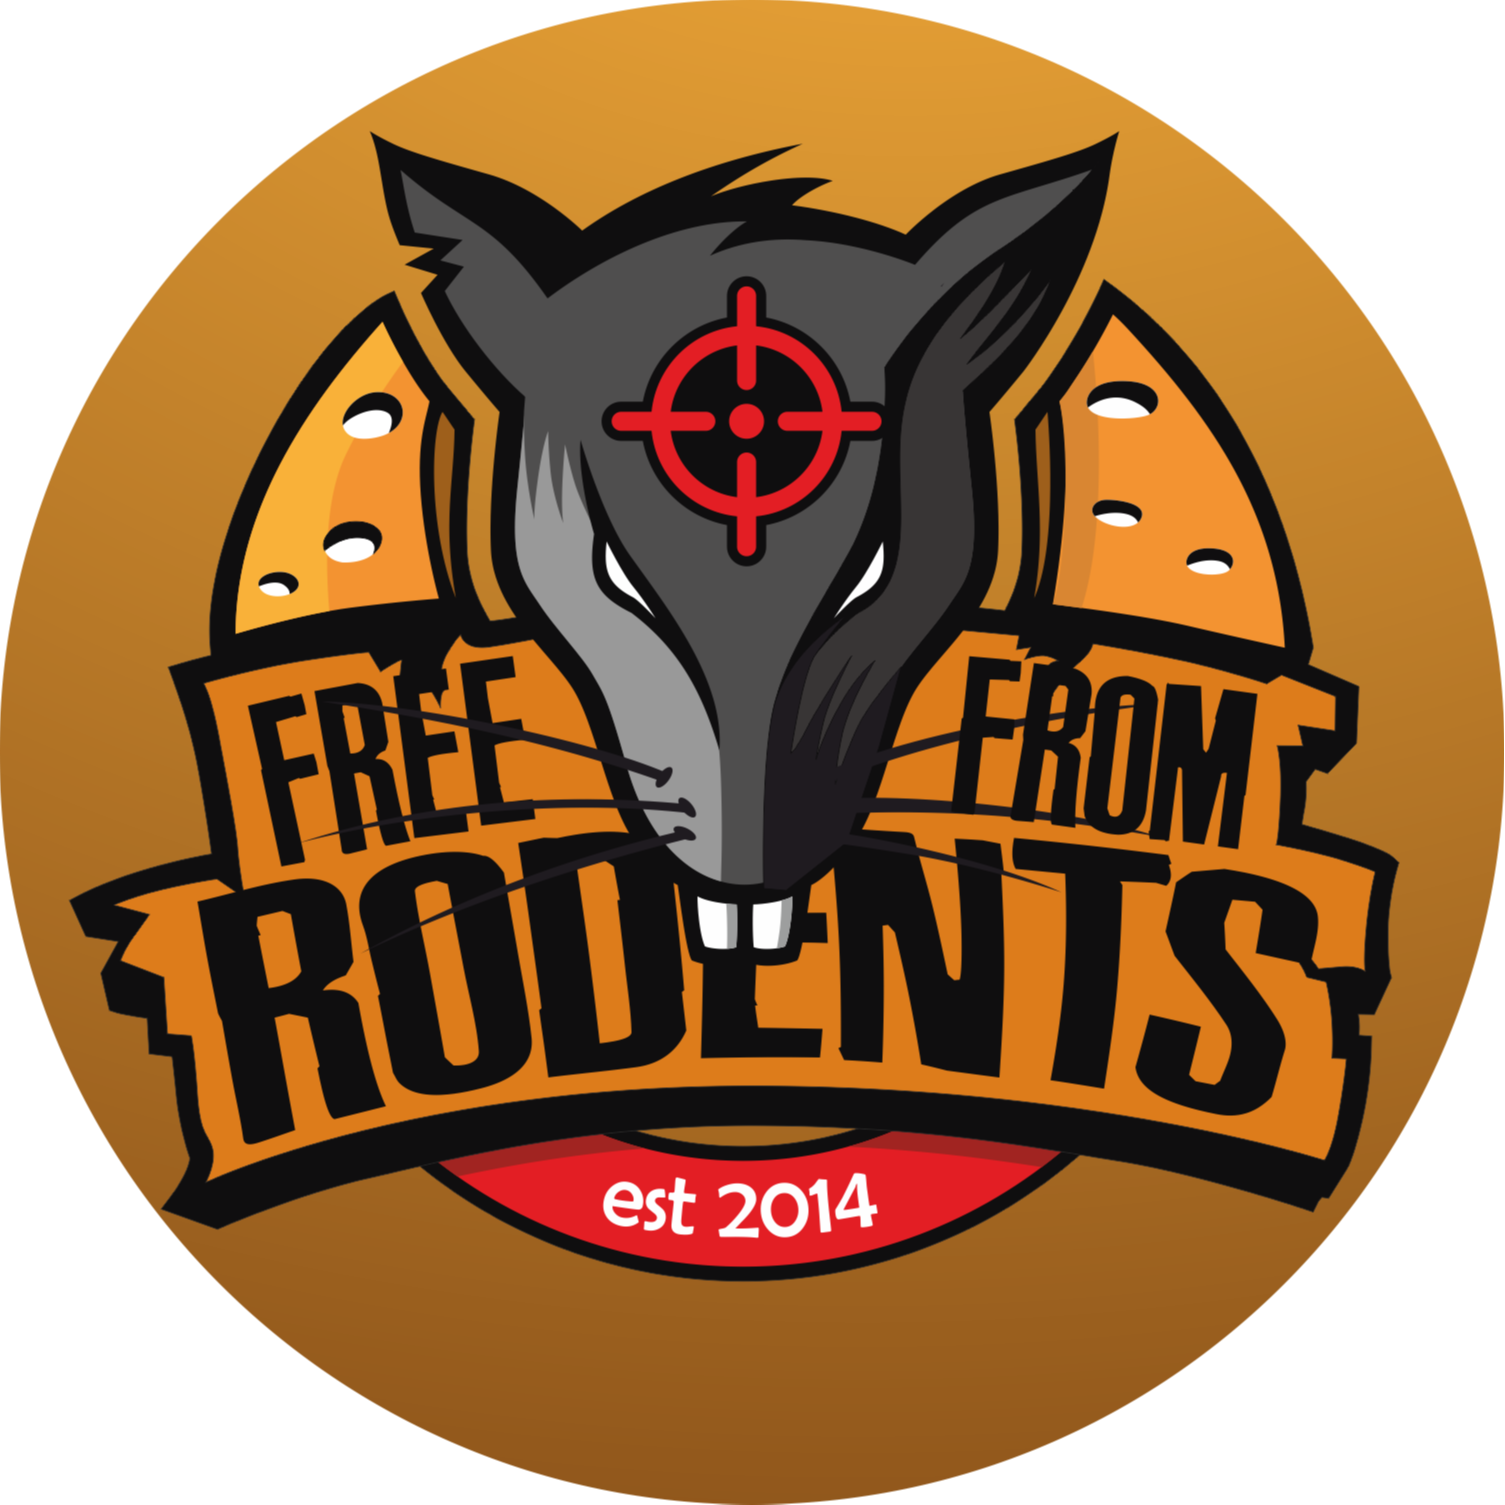 RODENTS%20logo%20avatar_20220315-211656.png